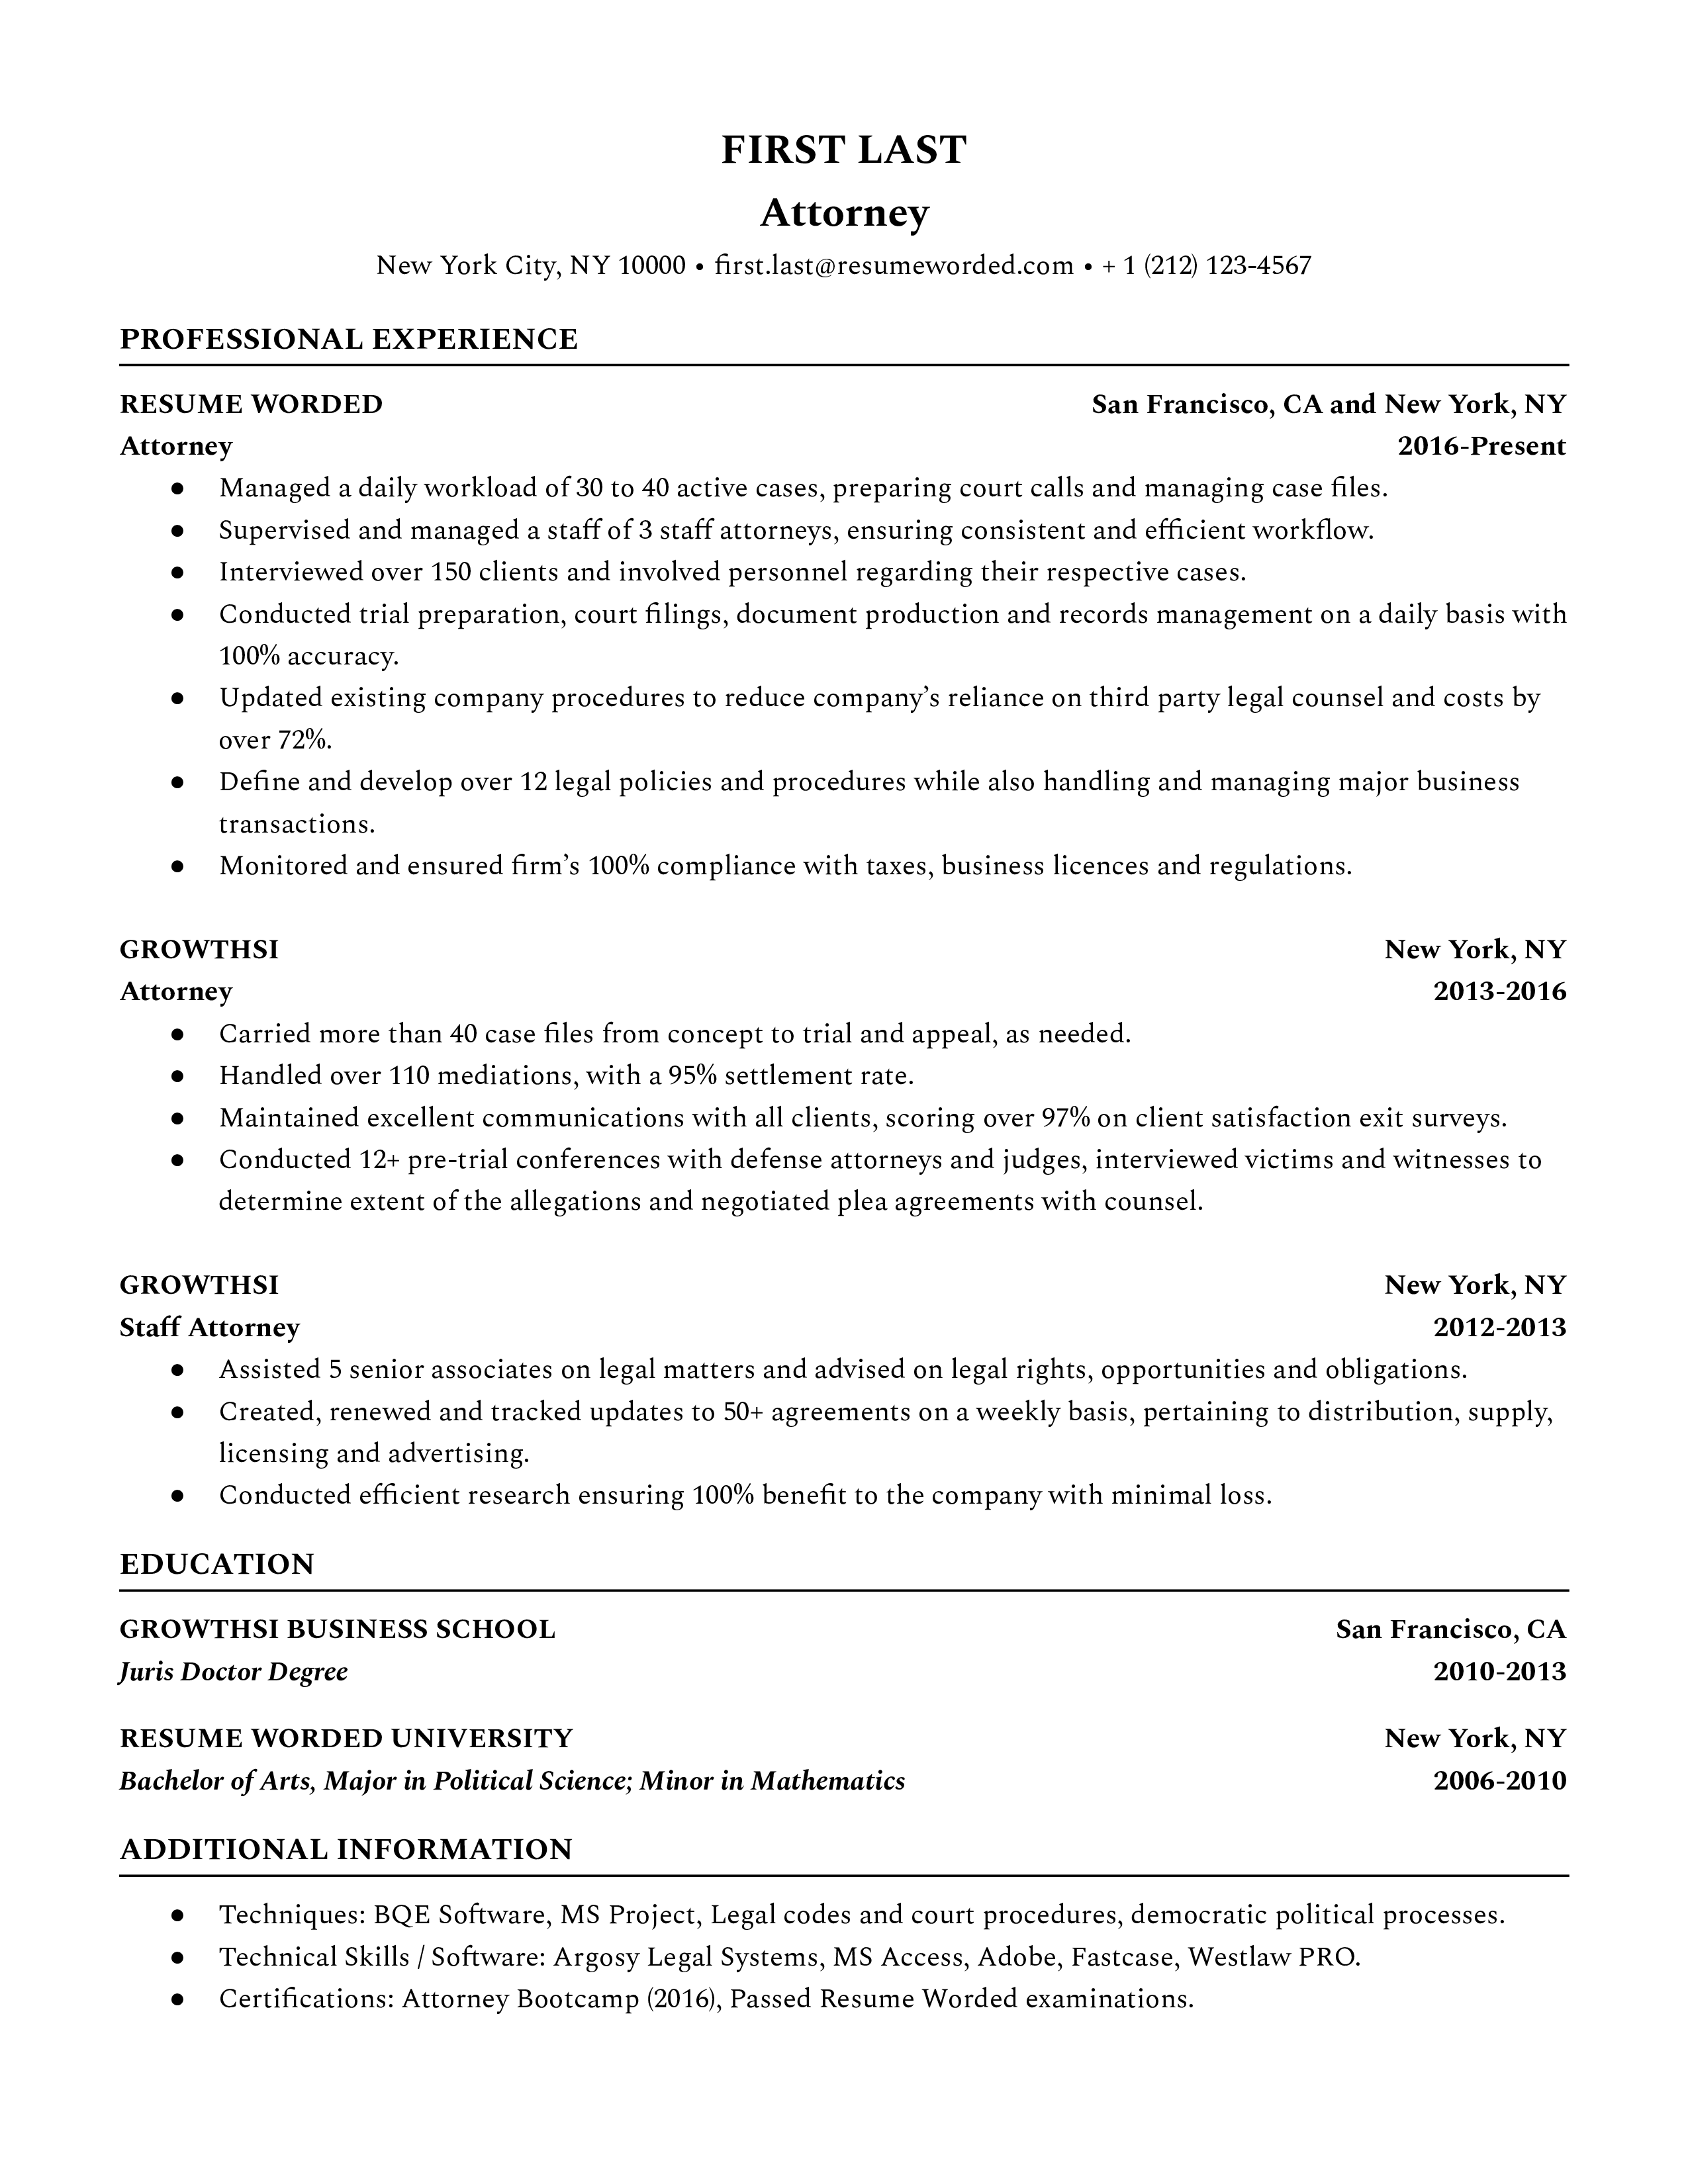 Attorney resume featuring relevant experience and attention to detail.